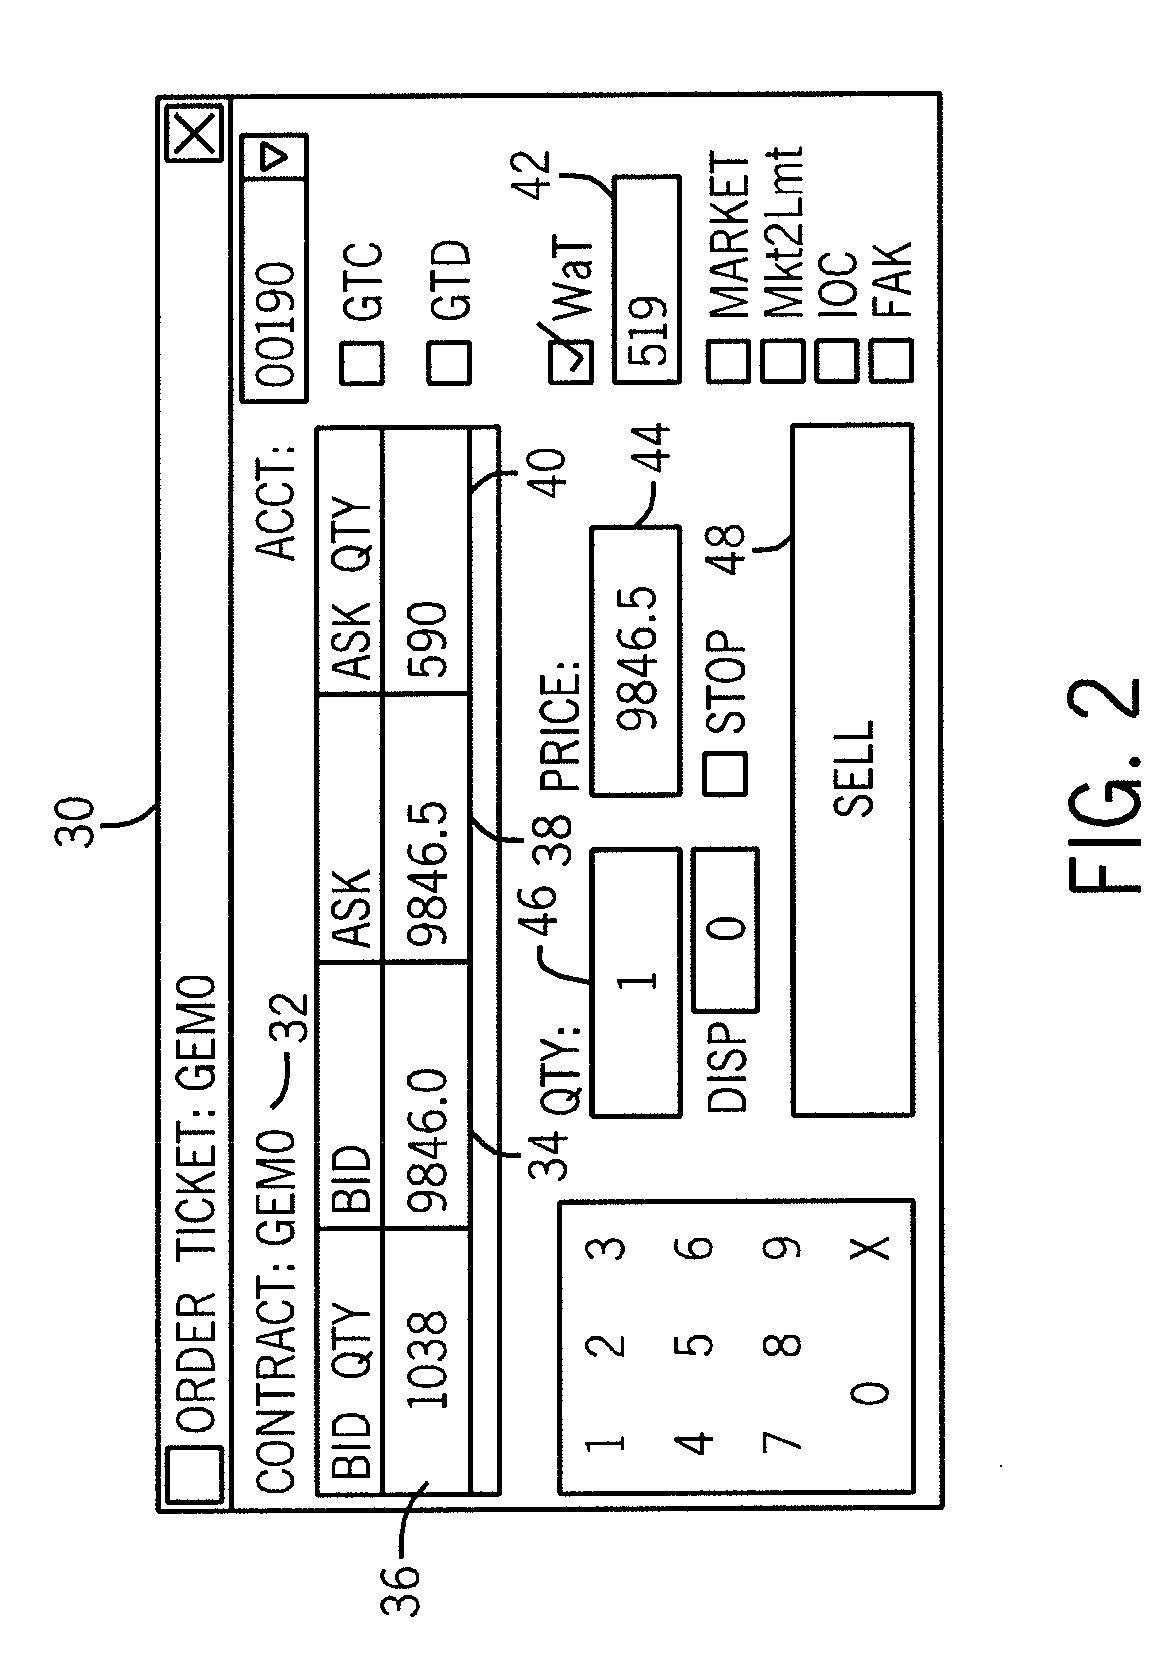 System and Method for Conditional Modification of Buy and Sell Orders in Electronic Trading Exchange